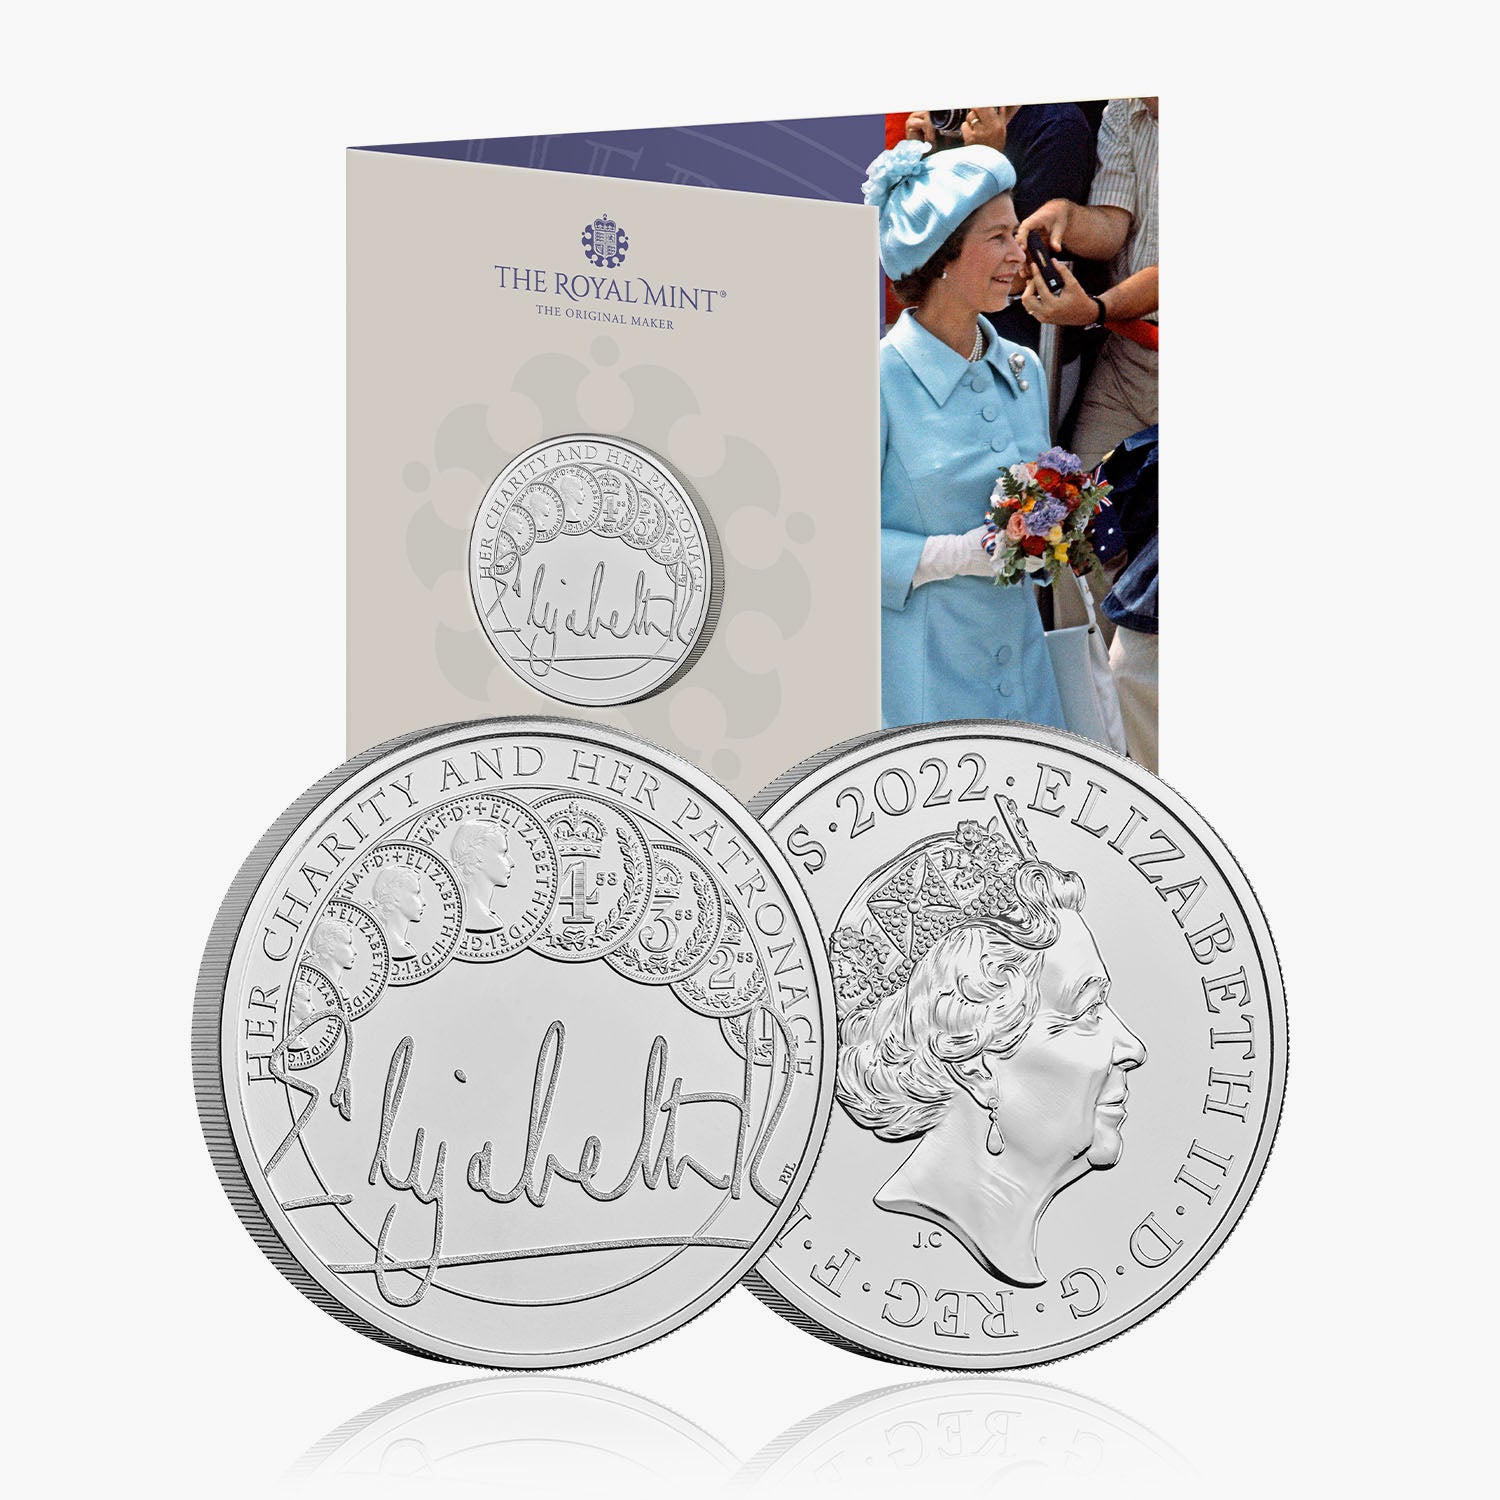 The Queen's Reign Charity &amp; Patronage 2022 UK £5 BU コイン